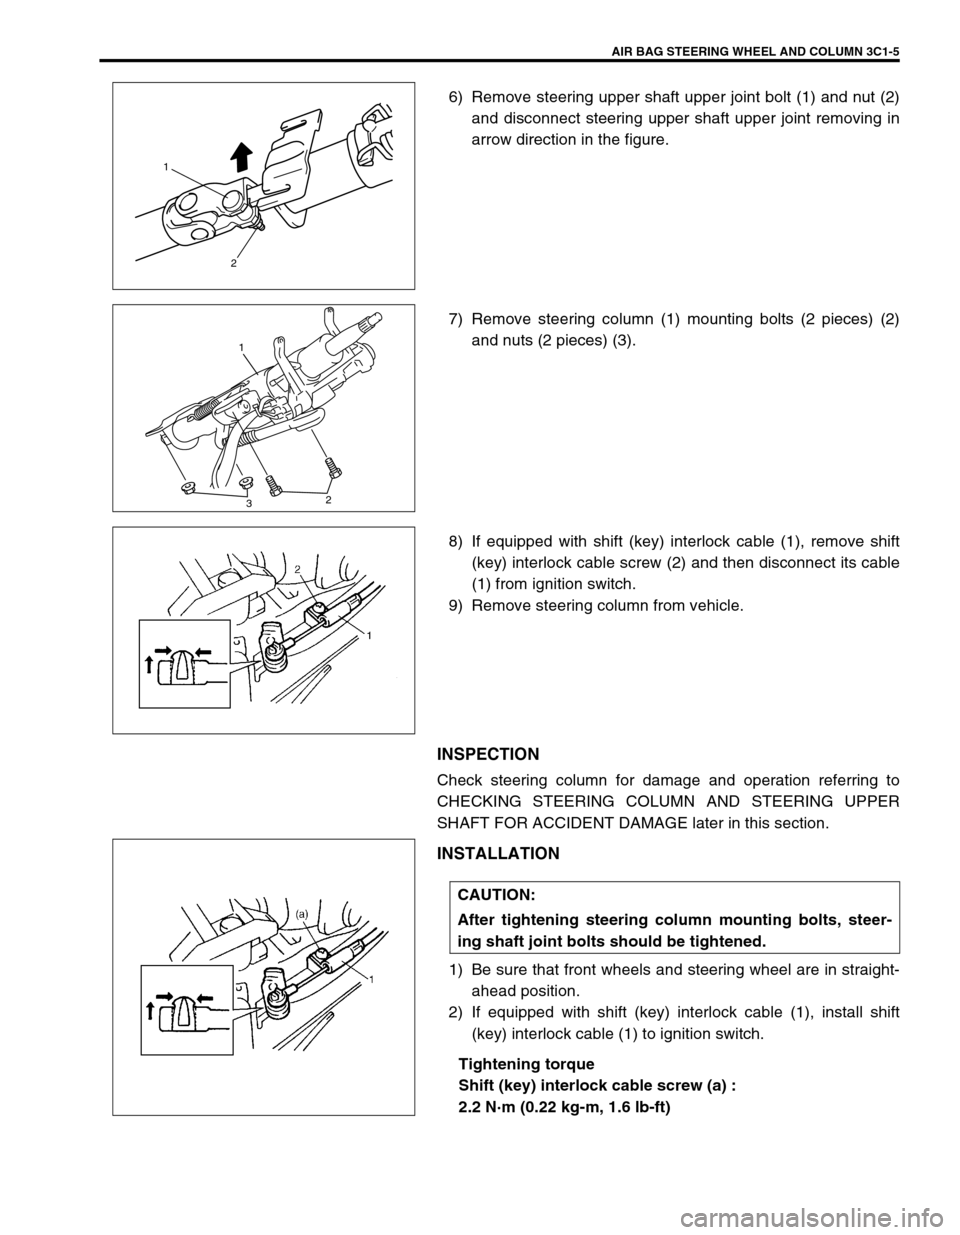 SUZUKI GRAND VITARA 2001 2.G User Guide AIR BAG STEERING WHEEL AND COLUMN 3C1-5
6) Remove steering upper shaft upper joint bolt (1) and nut (2)
and disconnect steering upper shaft upper joint removing in
arrow direction in the figure.
7) Re